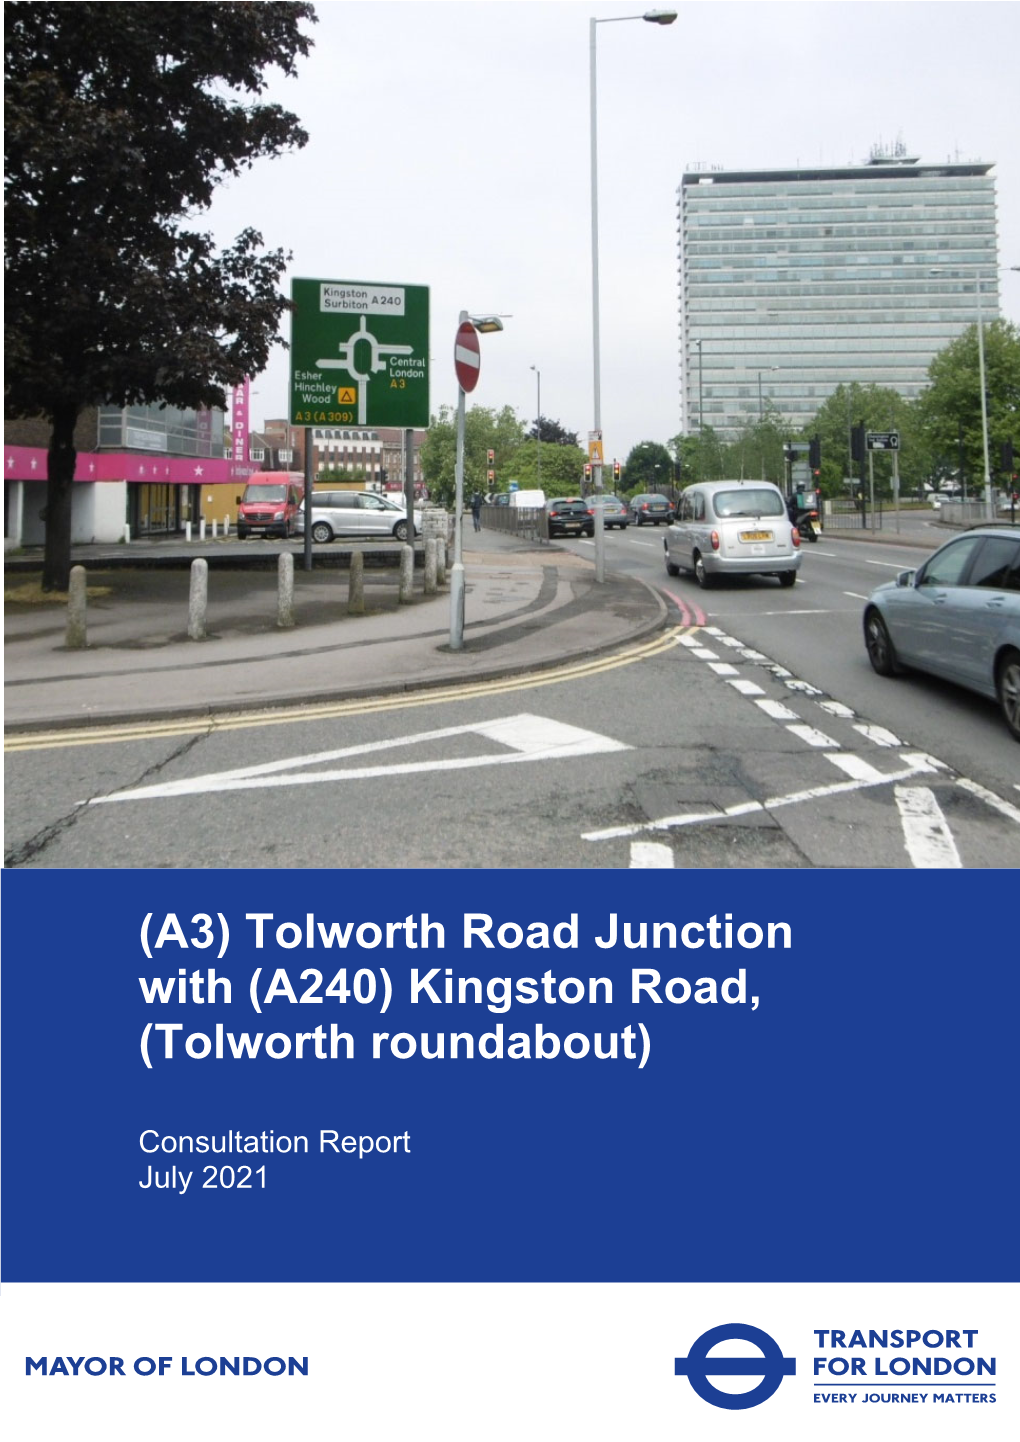 A3) Tolworth Road Junction with (A240) Kingston Road, (Tolworth Roundabout